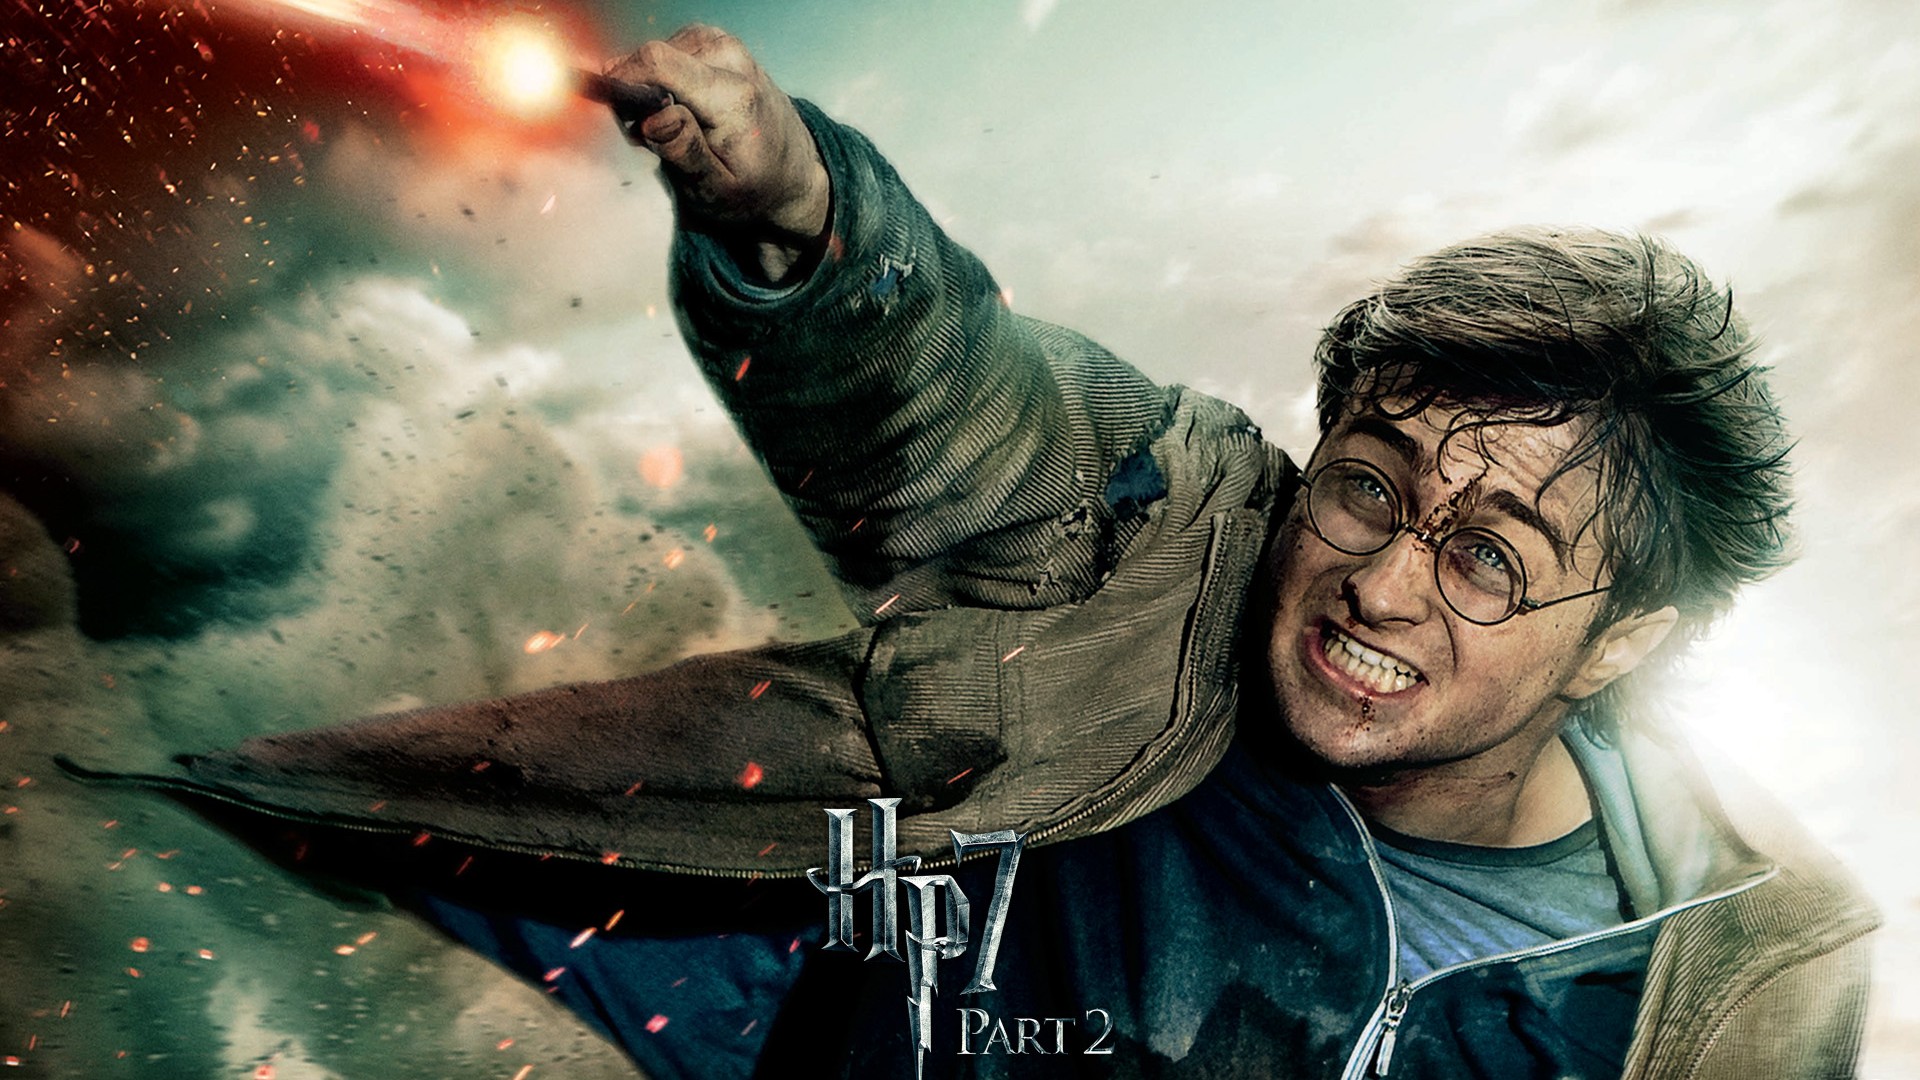 Harry Potter HD Movie Wallpaper High Quality